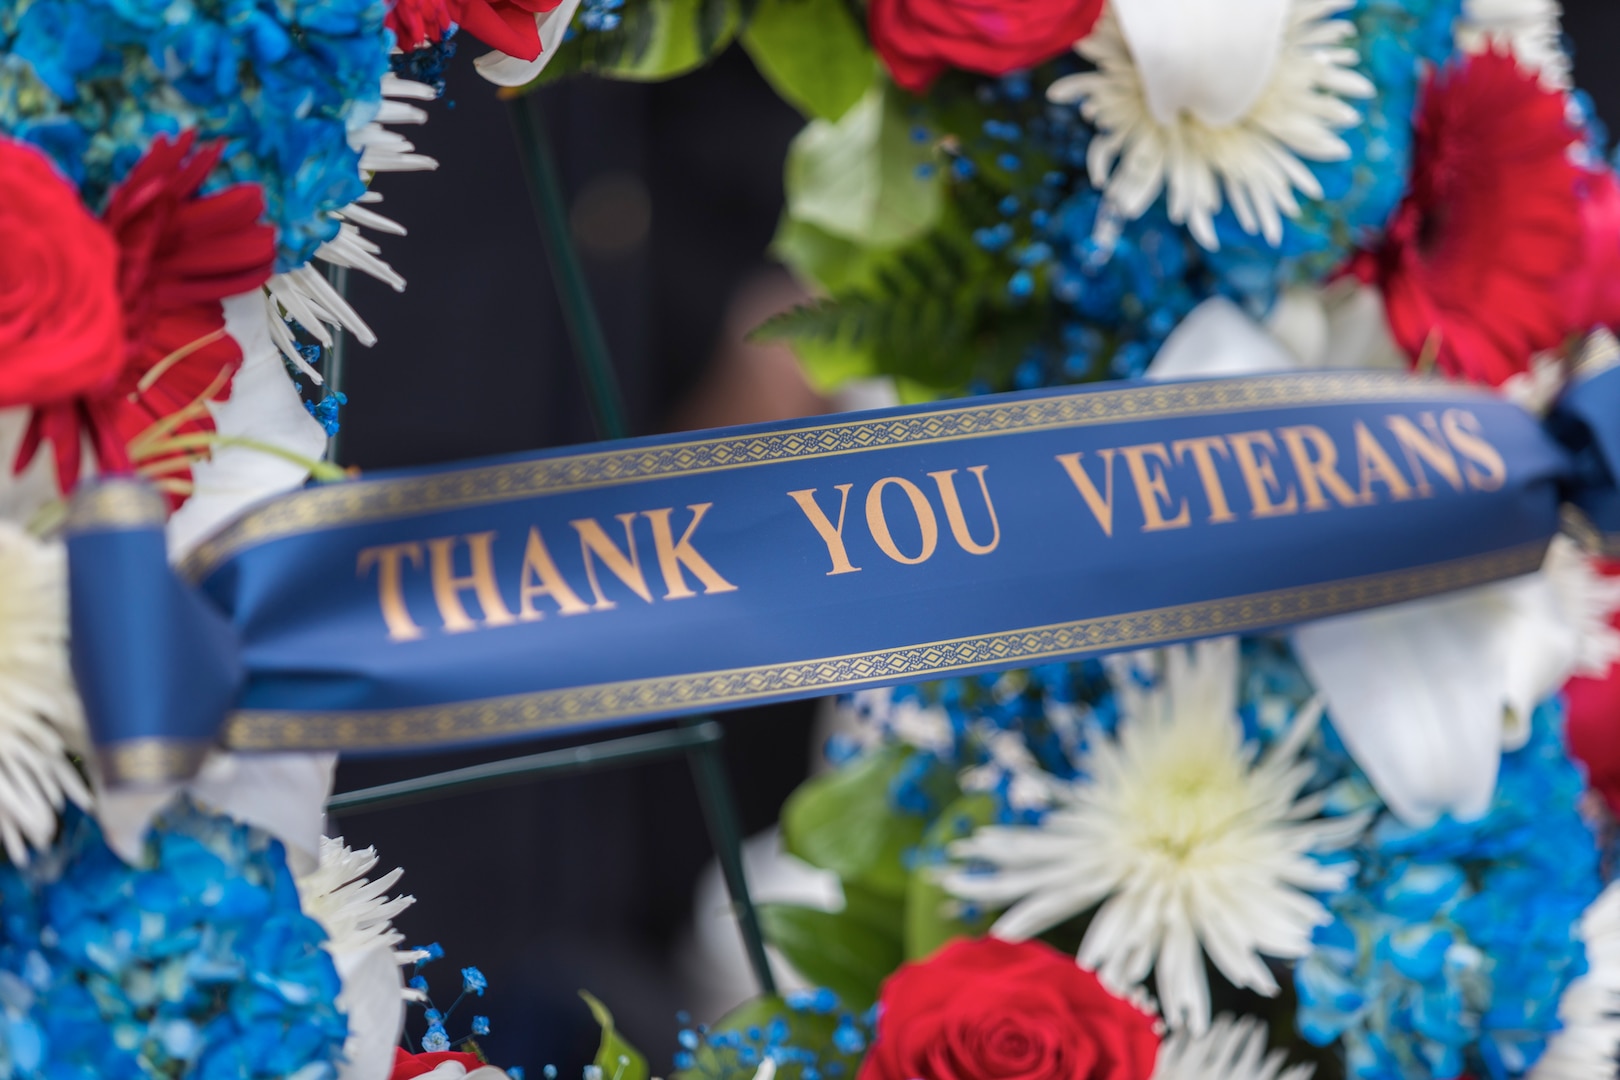 Veterans Day events abound around Military City USA > Joint Base San